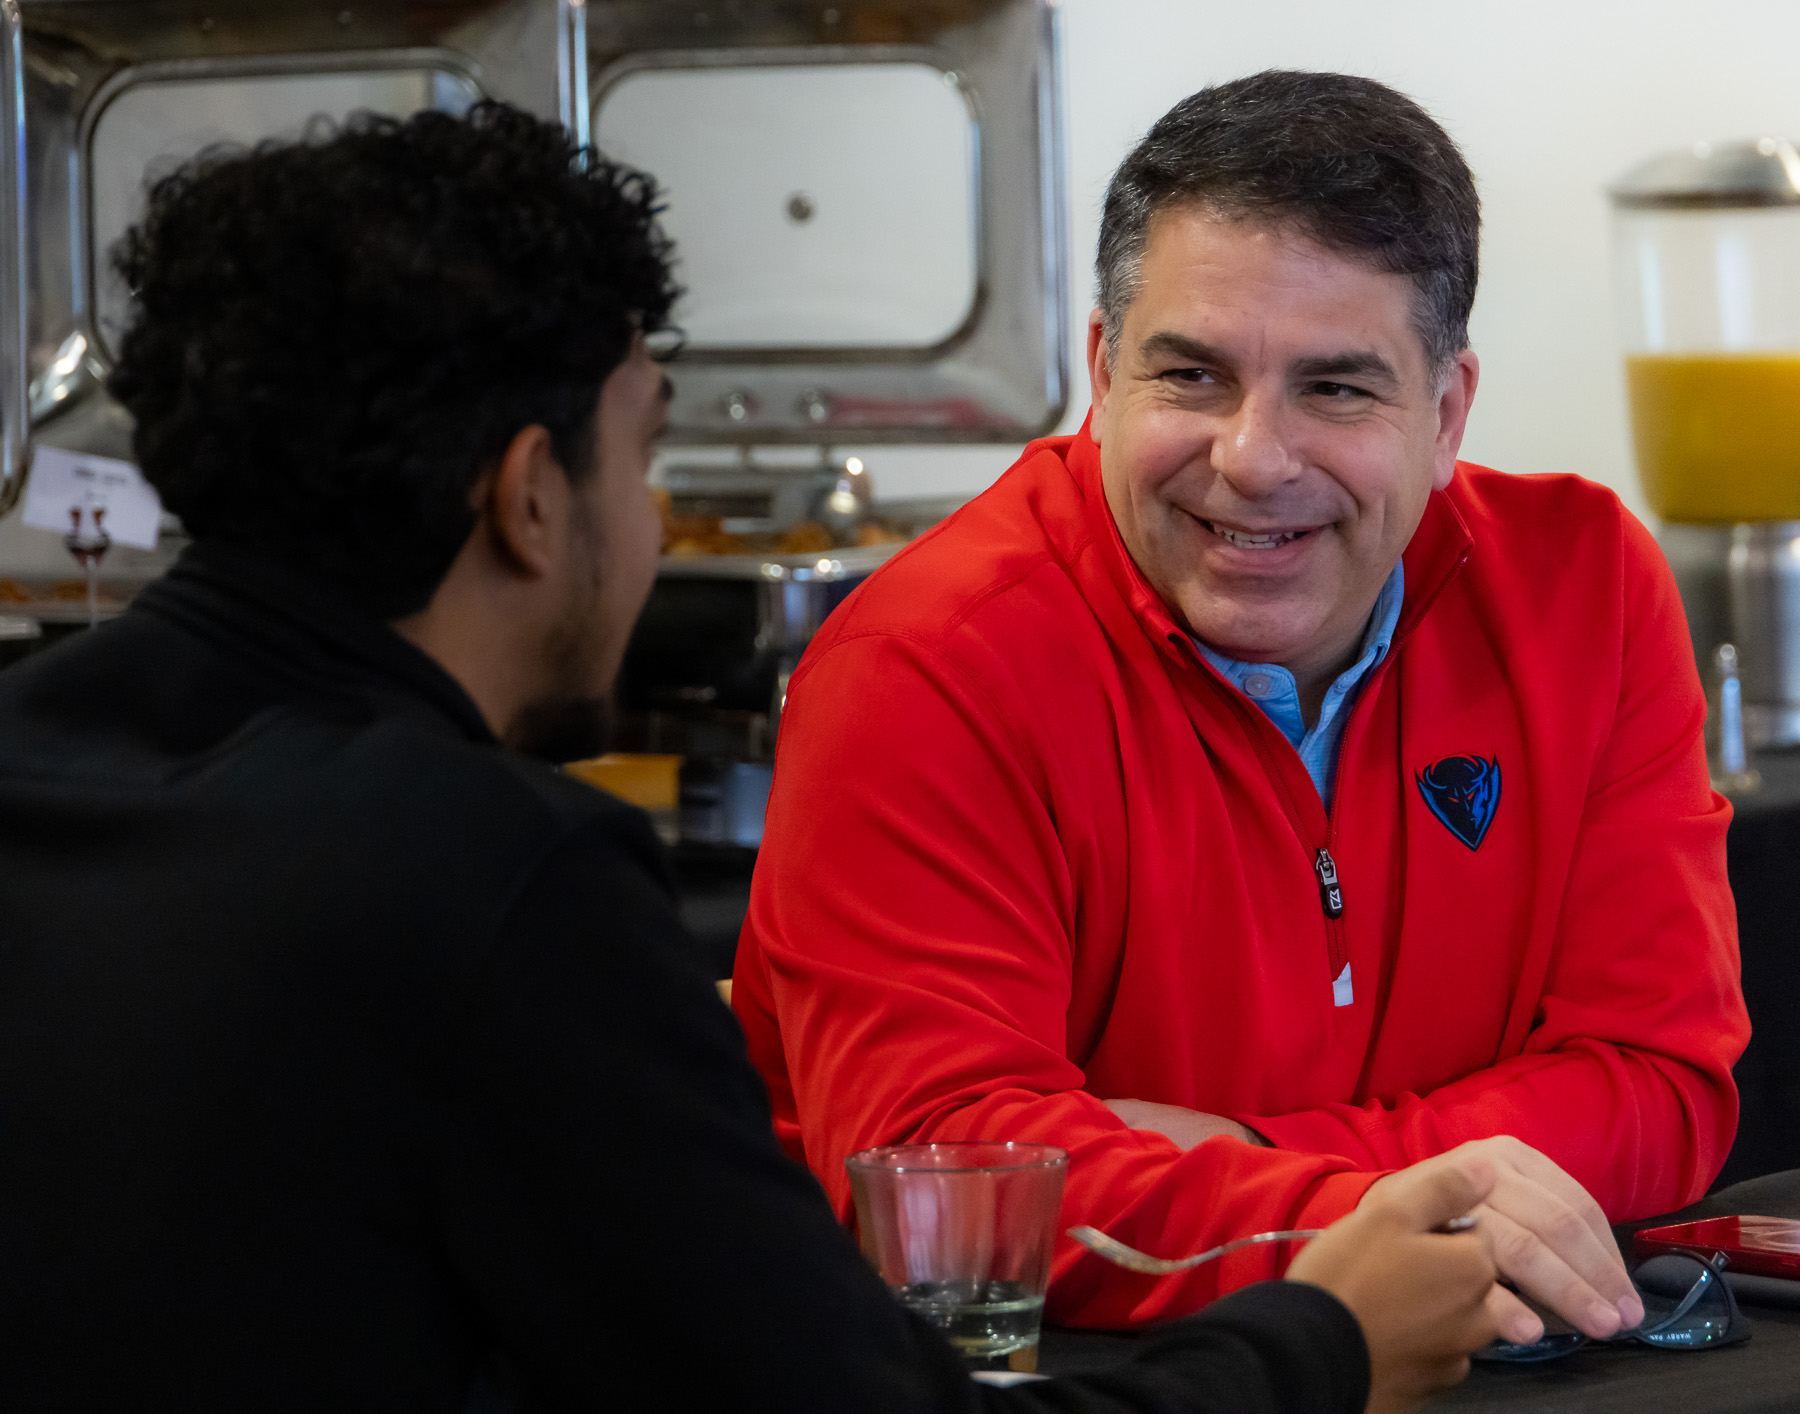 DePaul President Rob Manuel talks with a student about thier experience. (Photo by Jeff Carrion / DePaul University) 